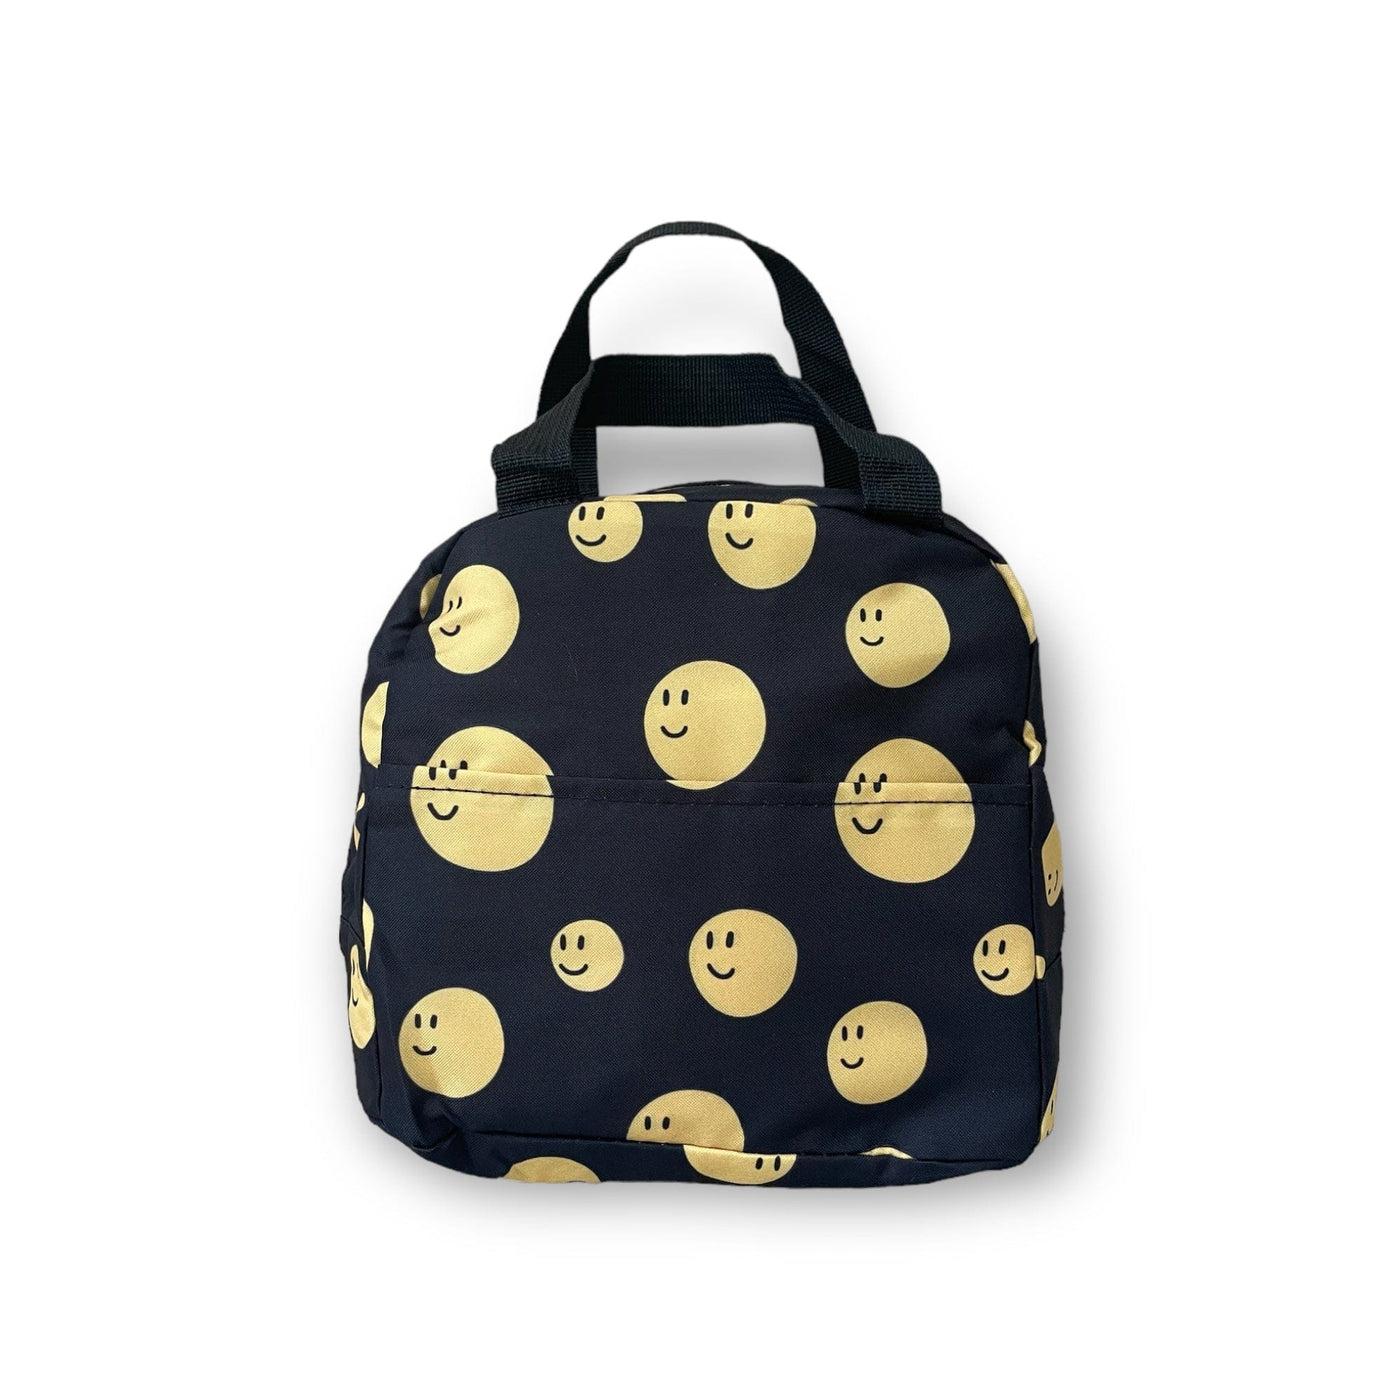 Best Day Ever Kids Bags Cool Kid Lunch Bag - All Smiles buy online boutique kids clothing